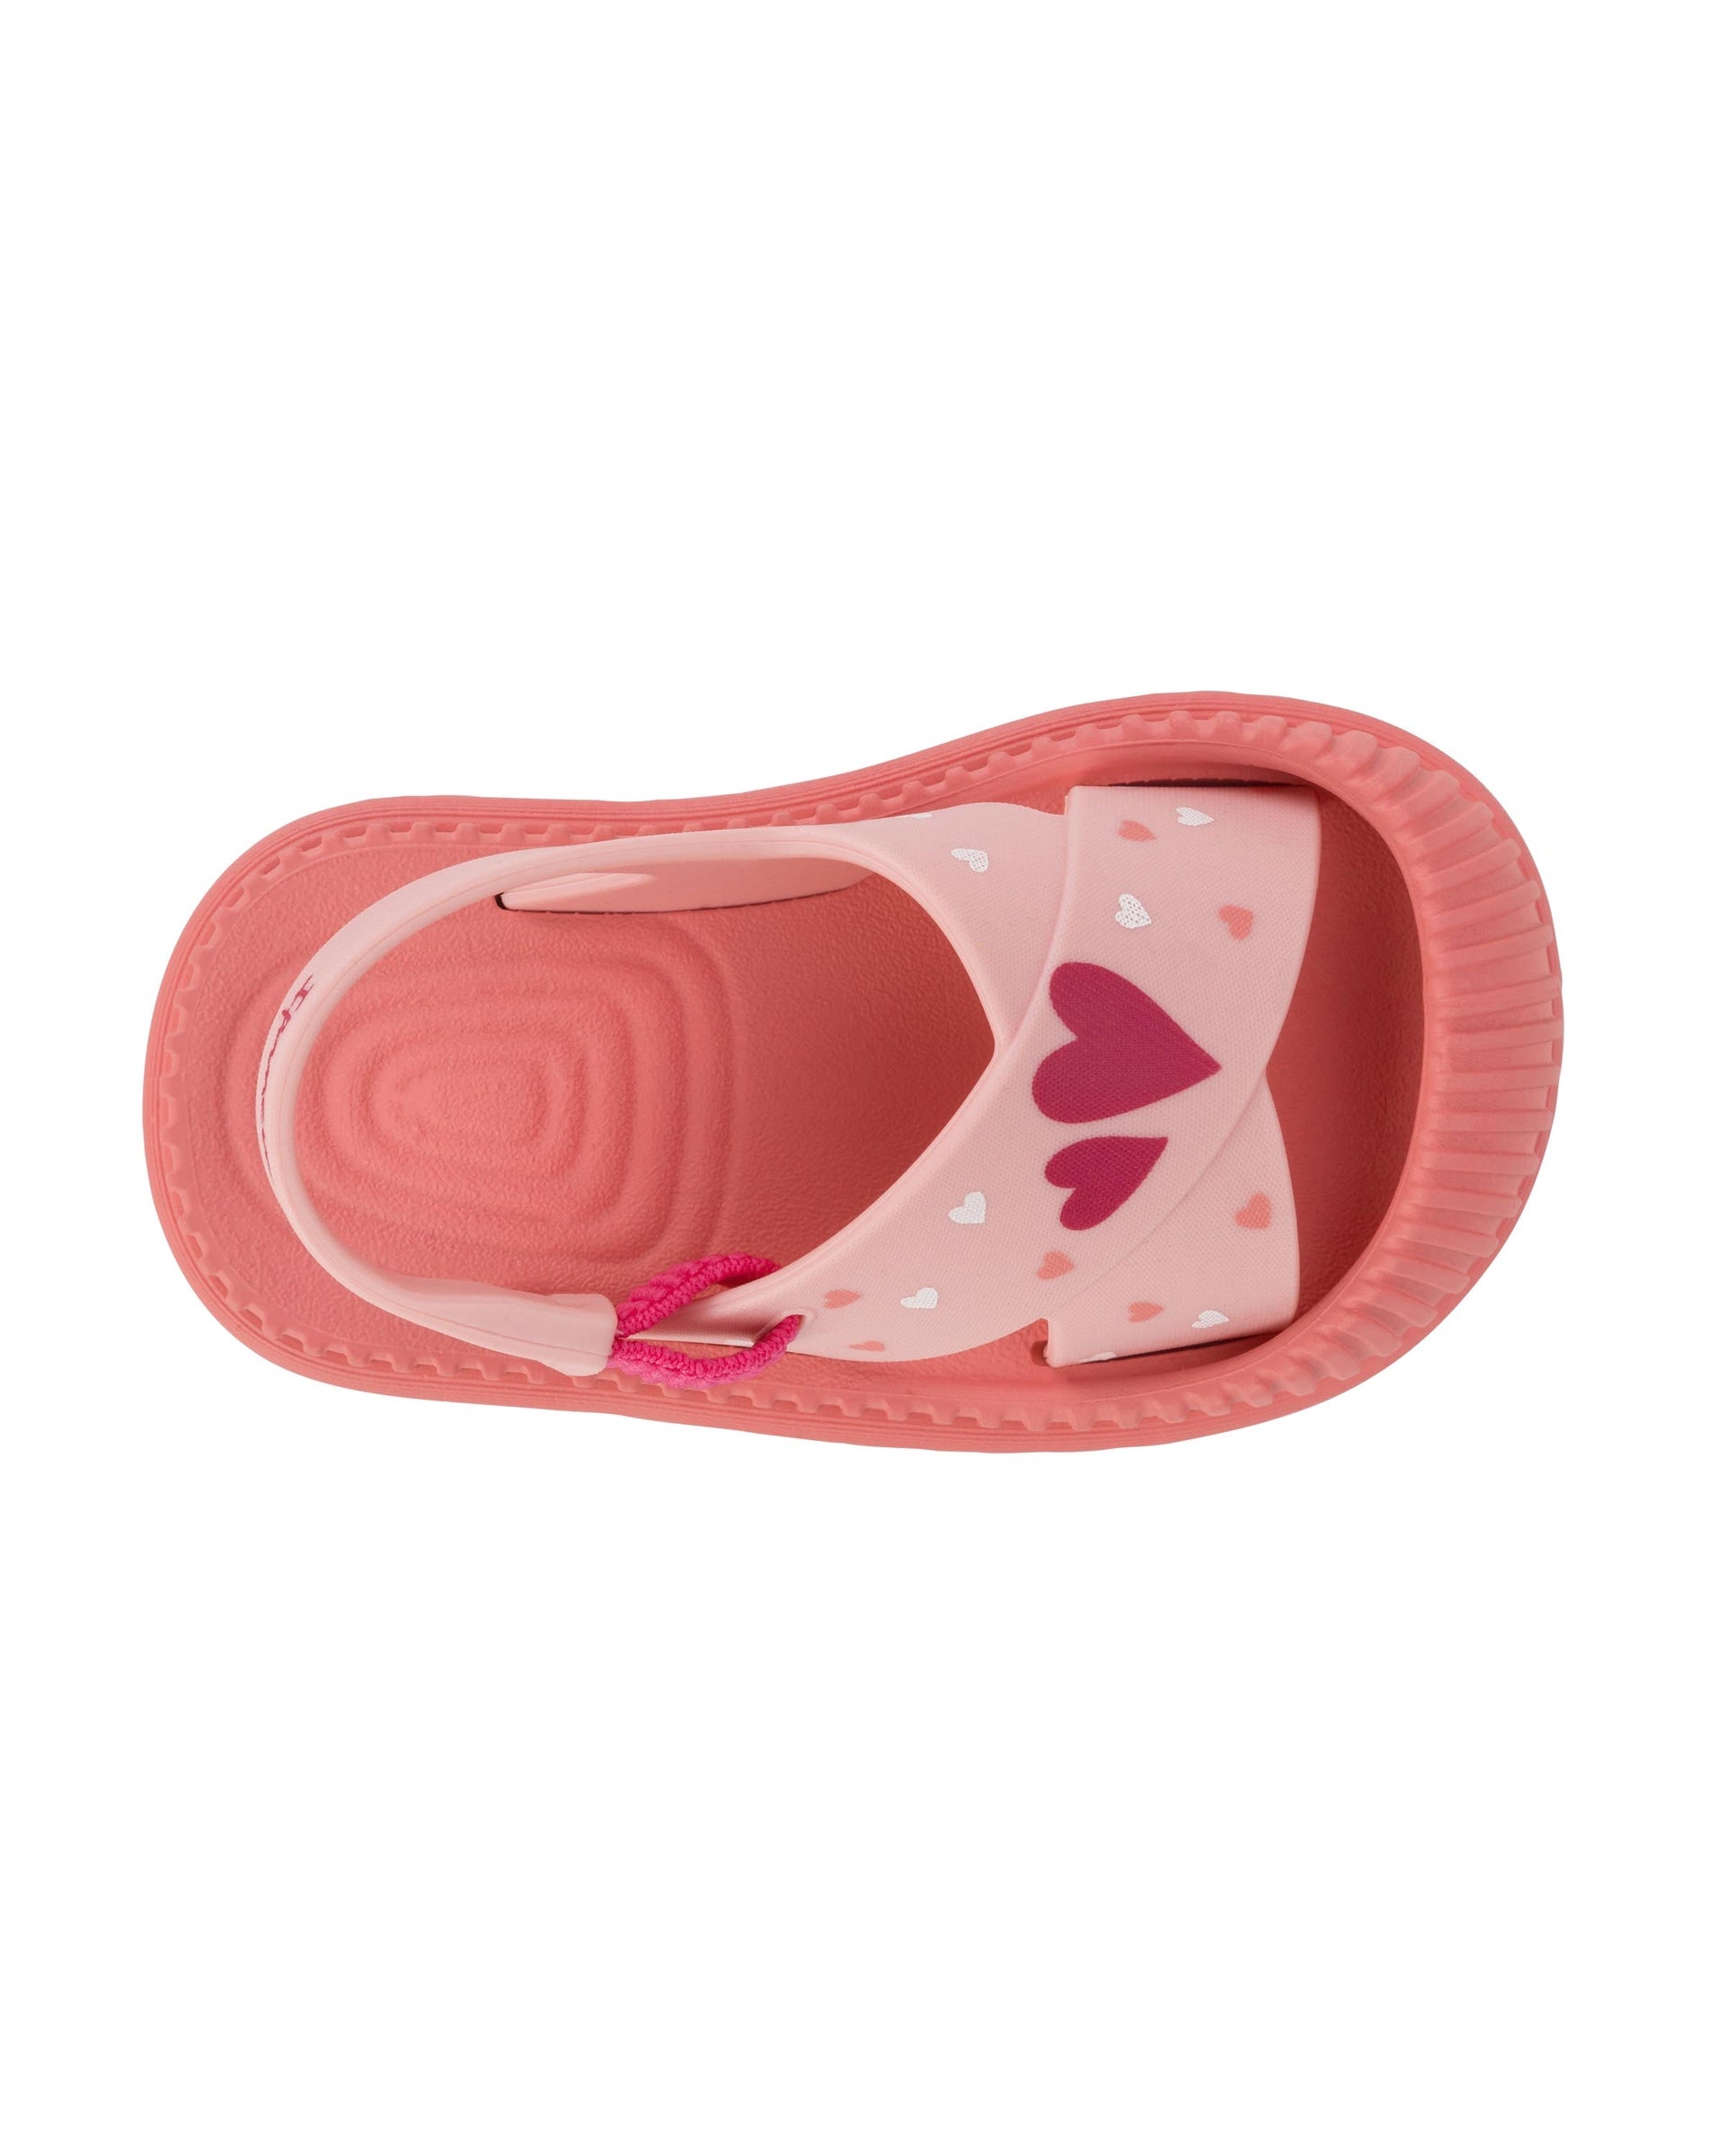 Top view of a pink Ipanema Cute baby sandal with hearts on the strap.